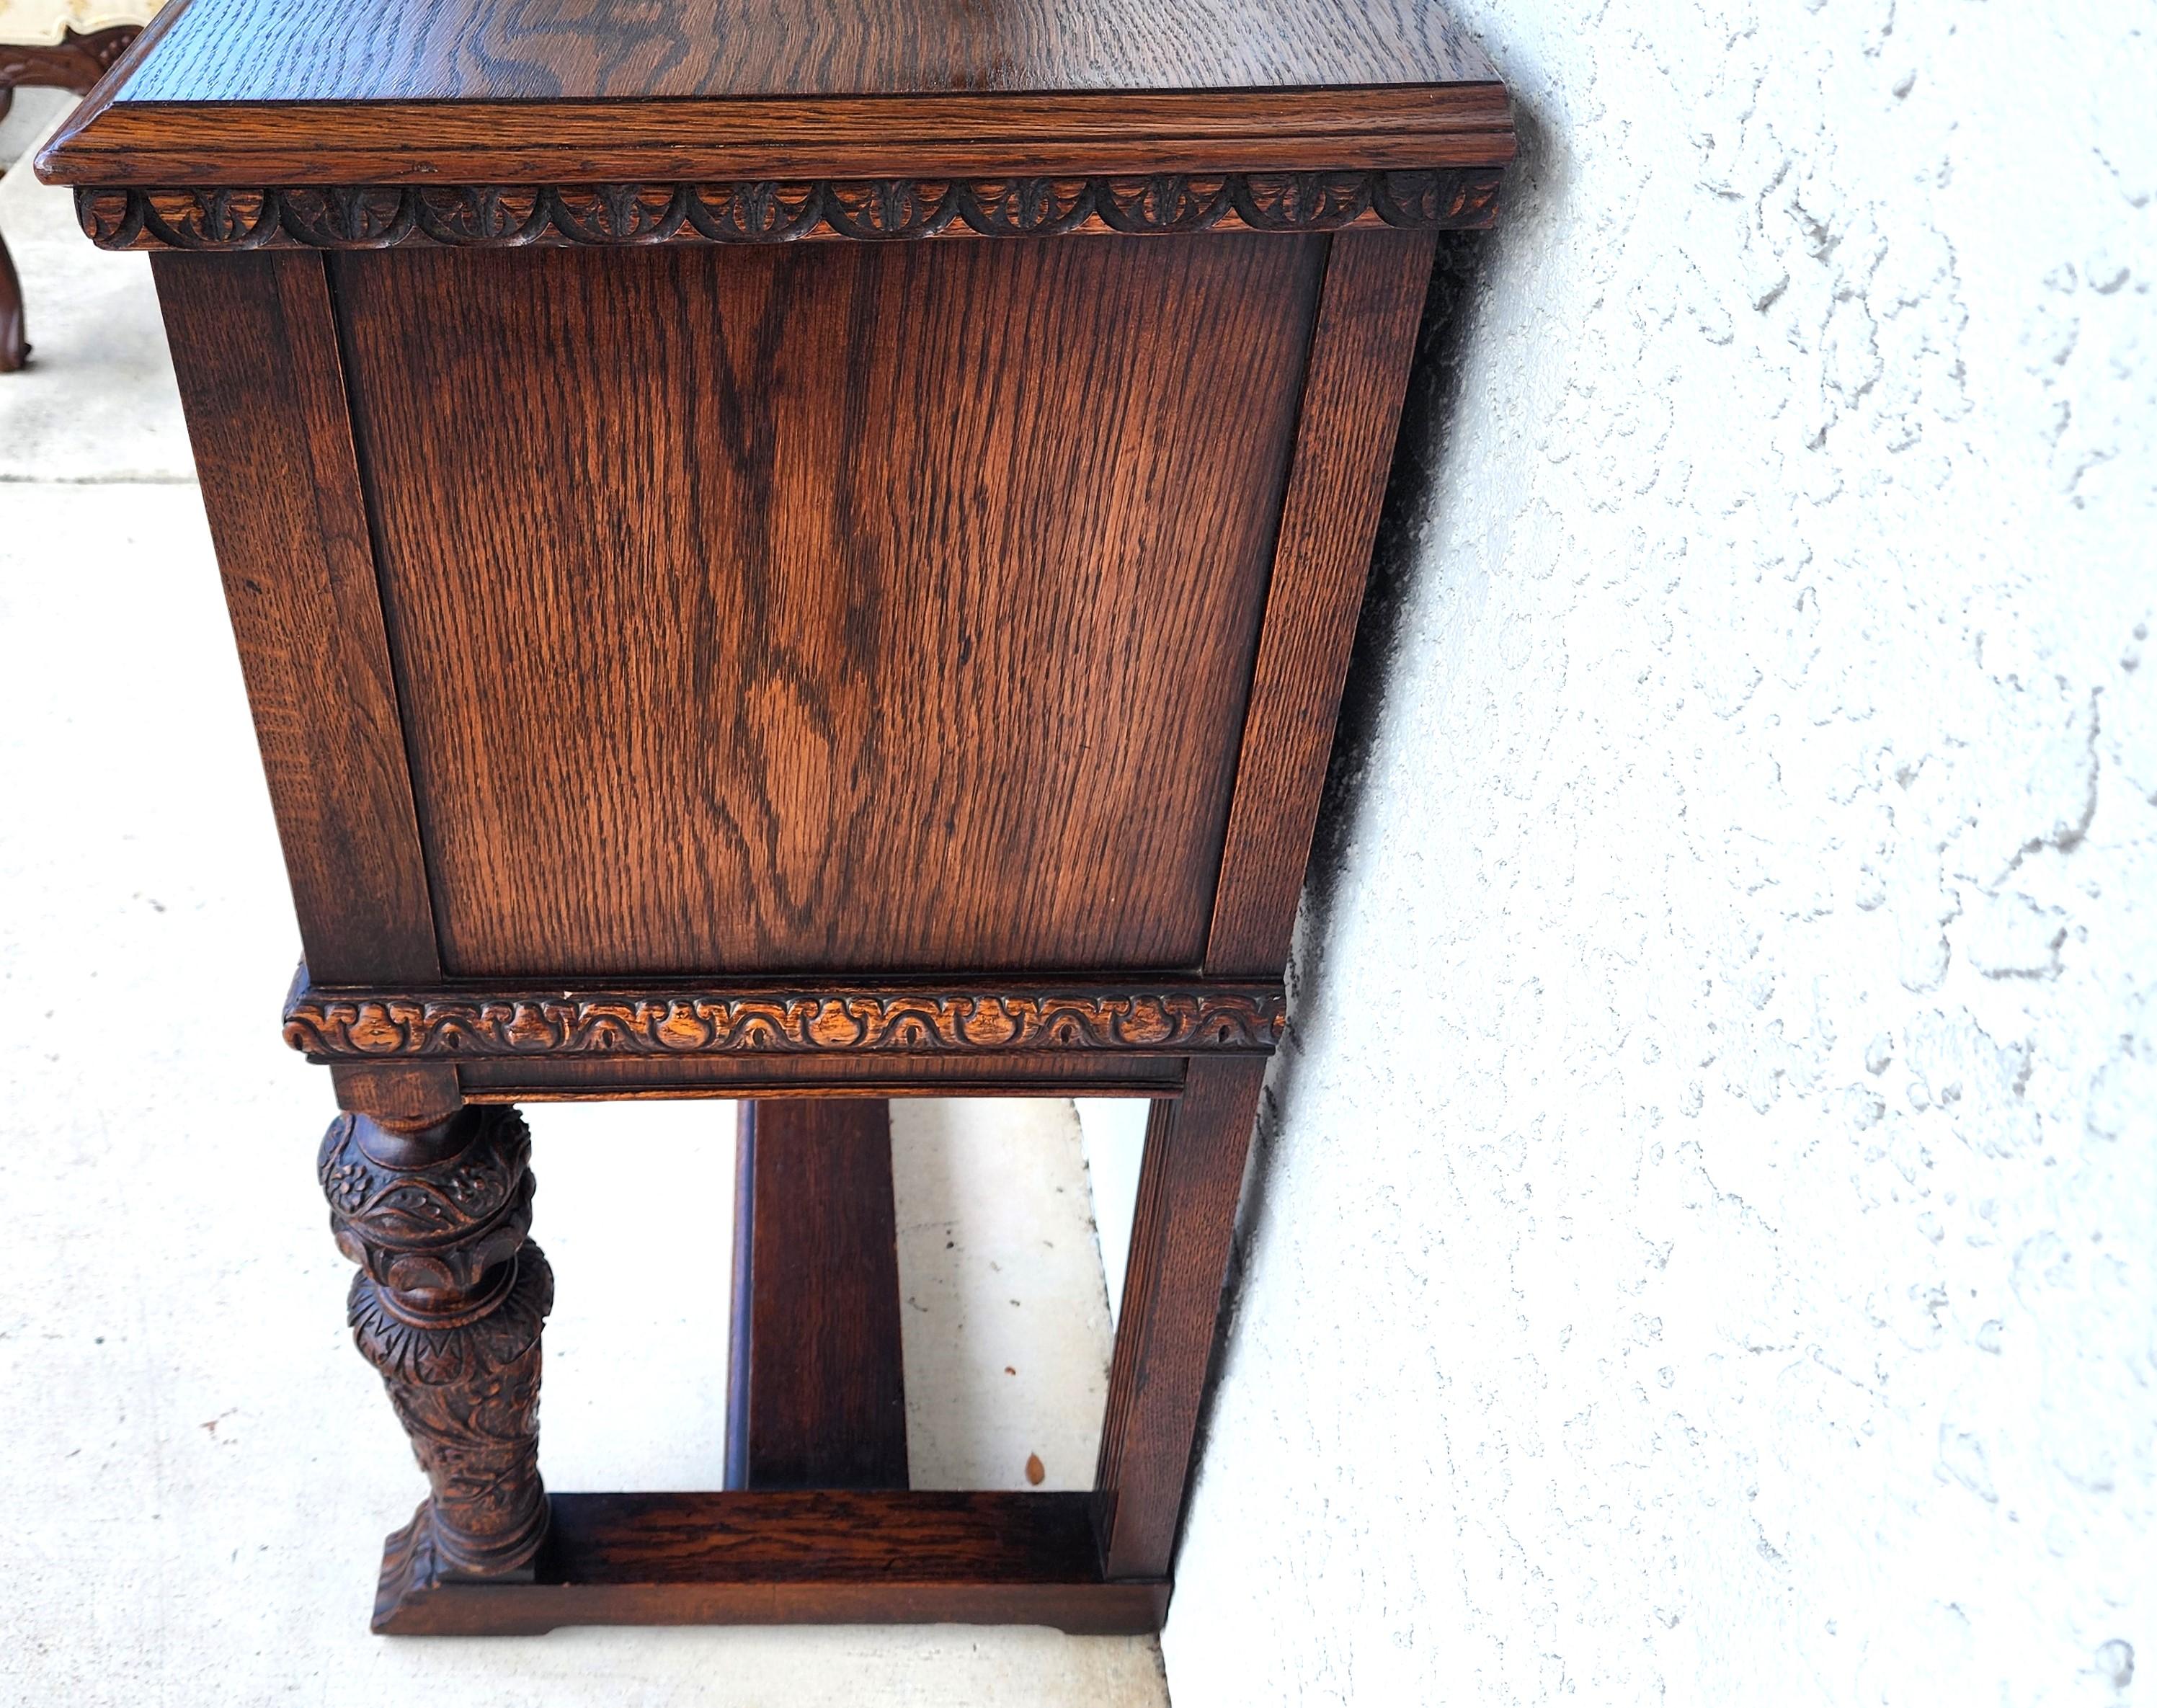 For FULL item description click on CONTINUE READING at the bottom of this page.

Offering One Of Our Recent Palm Beach Estate Fine Furniture Acquisitions Of An 
Antique Oak Early 1900s Buffet Sideboard TV Table

Approximate Measurements in